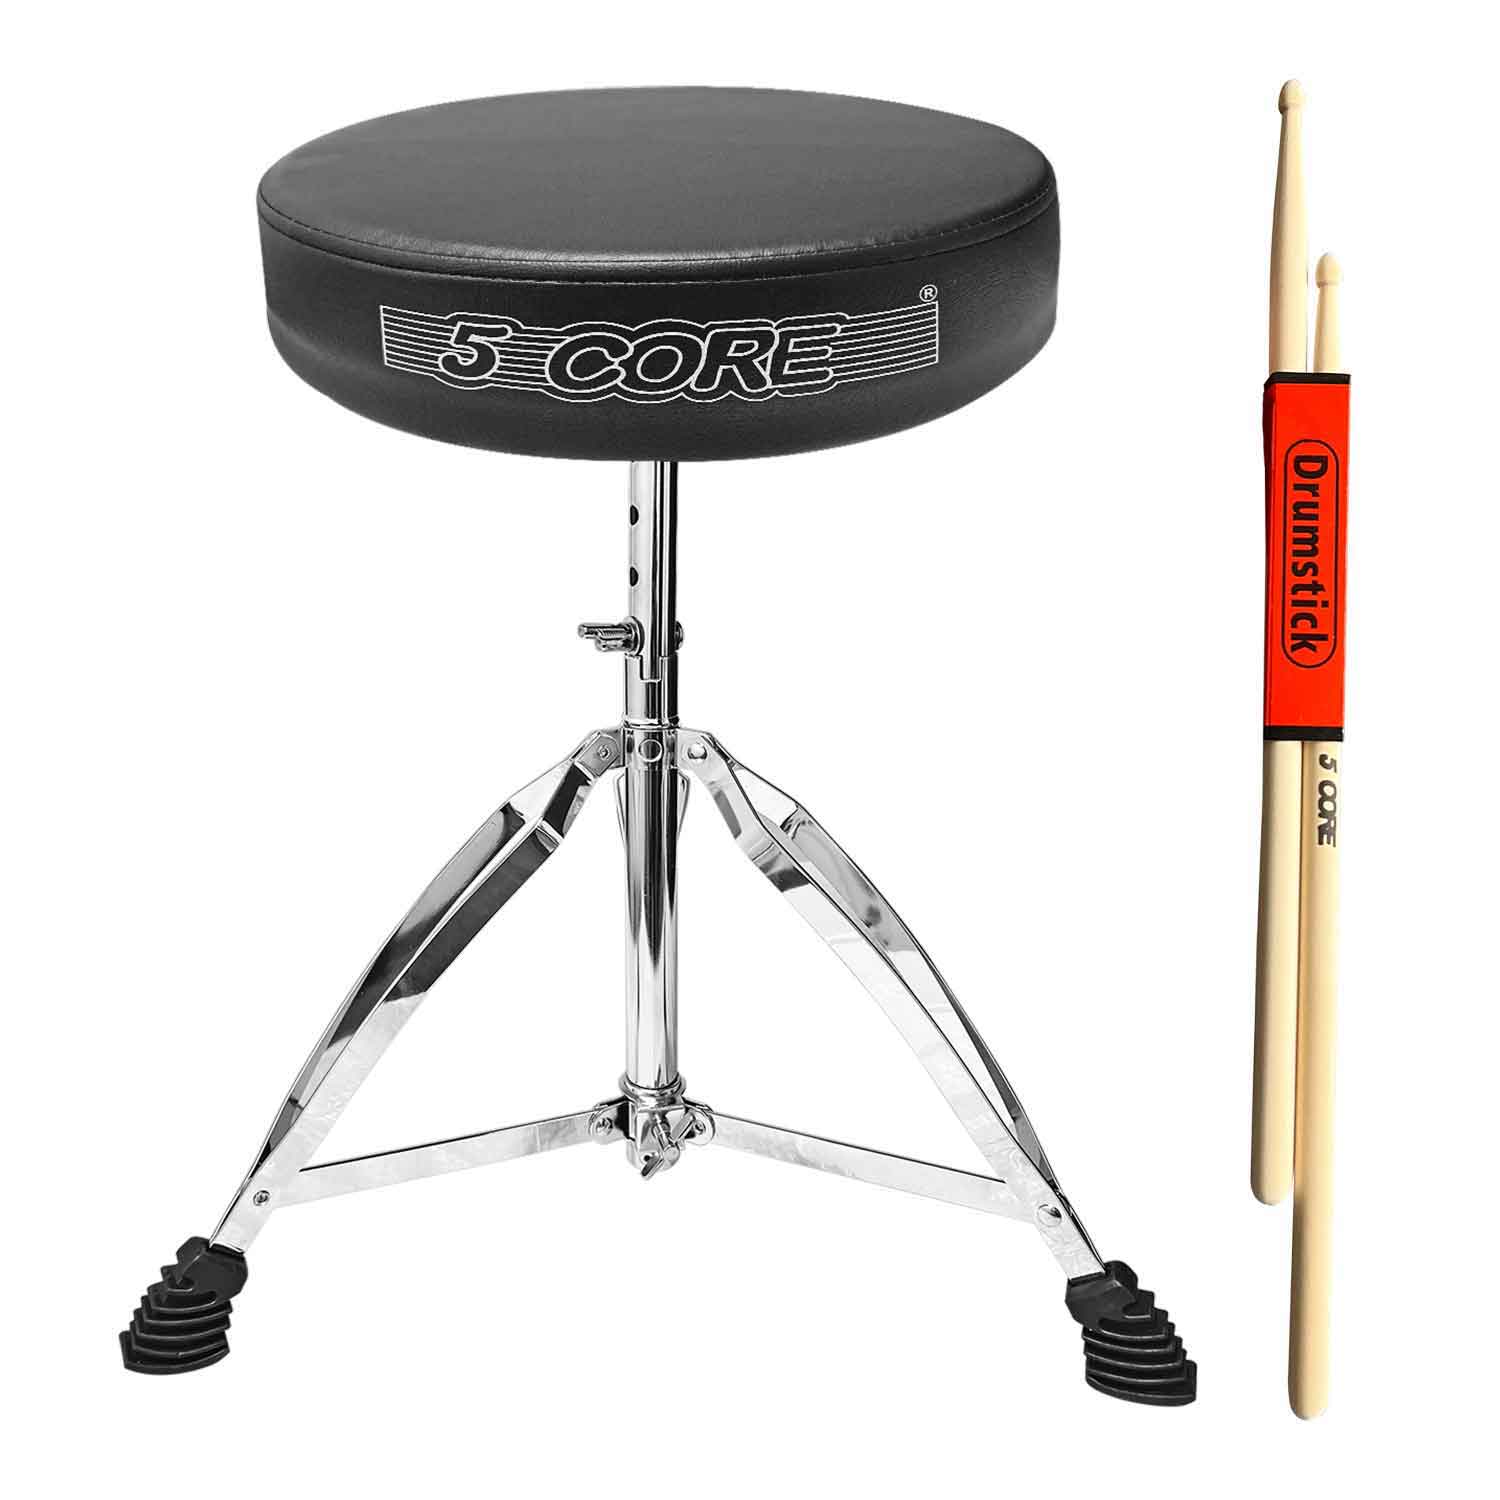 5 Core Drum Throne • Height Adjustable Guitar Stool • Thick Padded Comfortable Drummer Chair Black